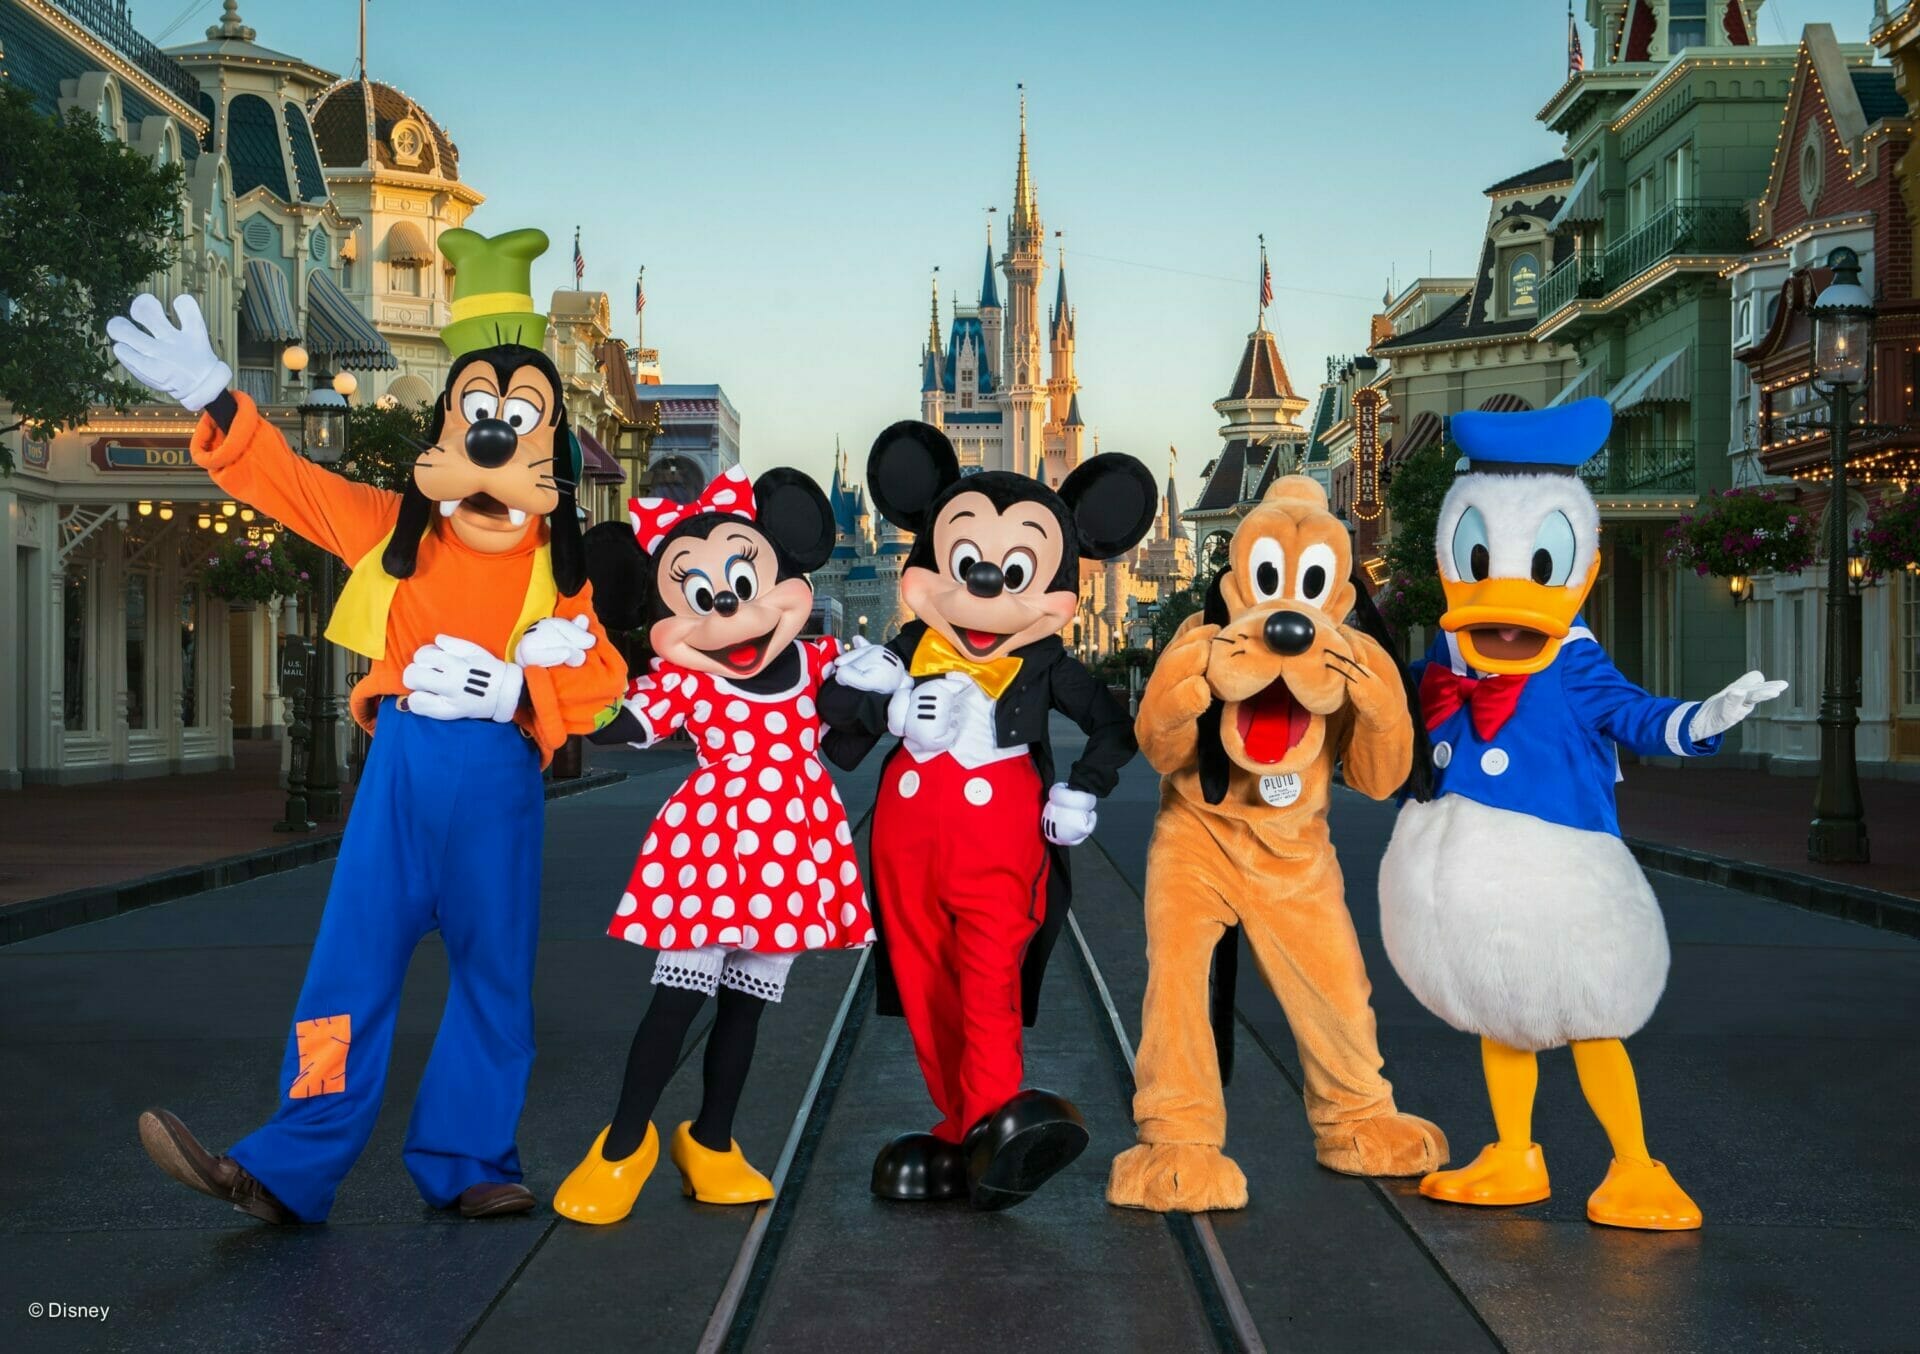 Mickey, Minnie, Pluto, Donald Duck and Goofy in front of the Disney Castle